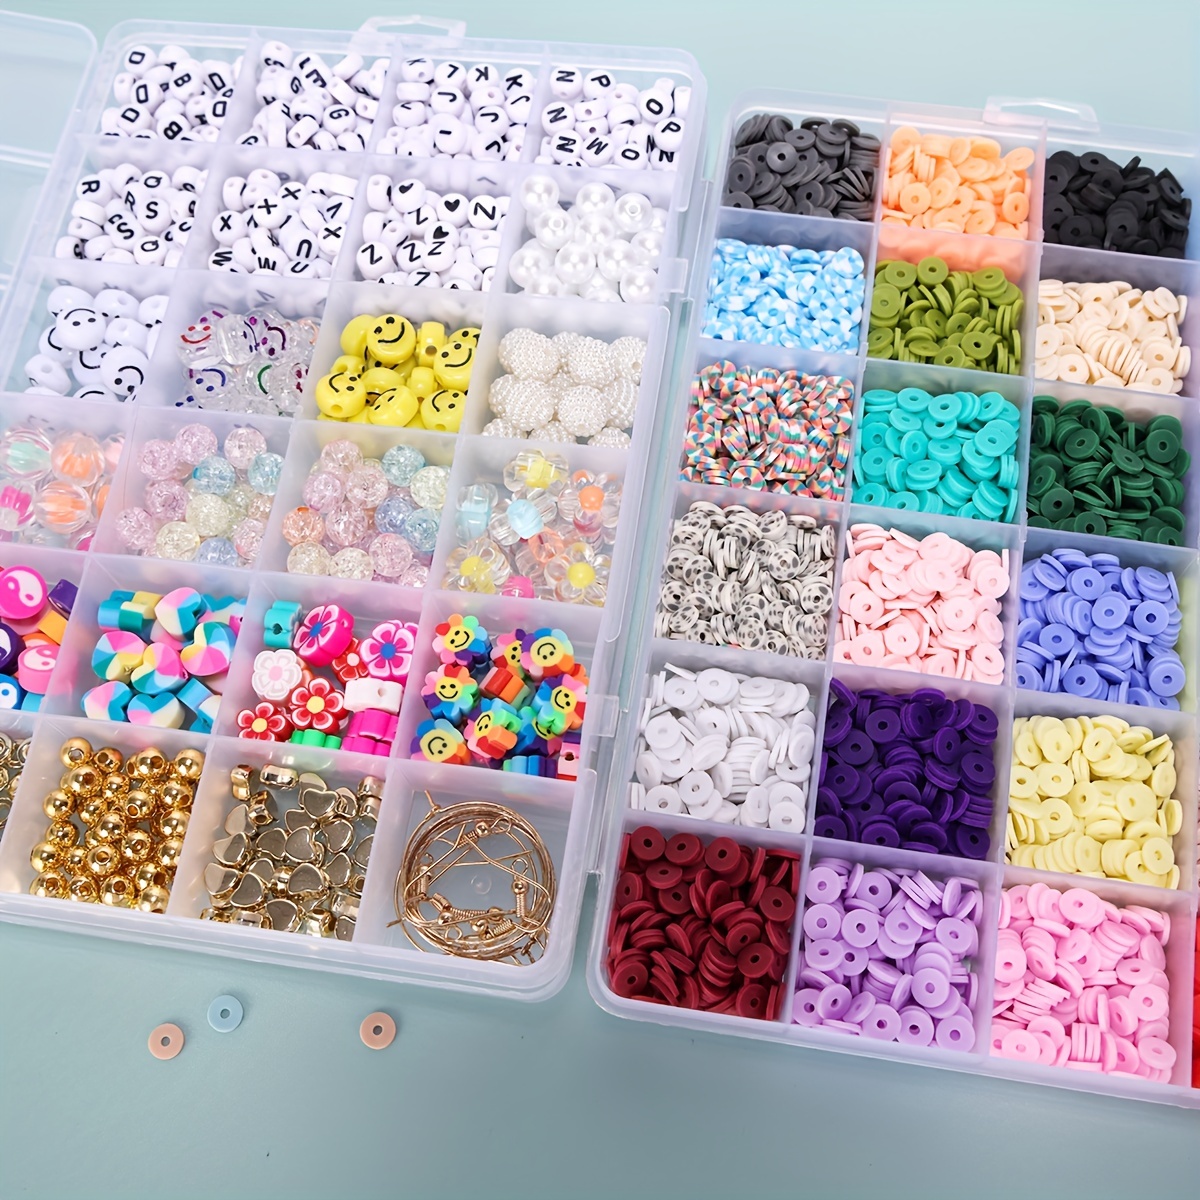 4600pcs Clay Beads Kits For Bracelets Making , Polymer Clay Flat Round Preppy  Beads With Pendant Ch